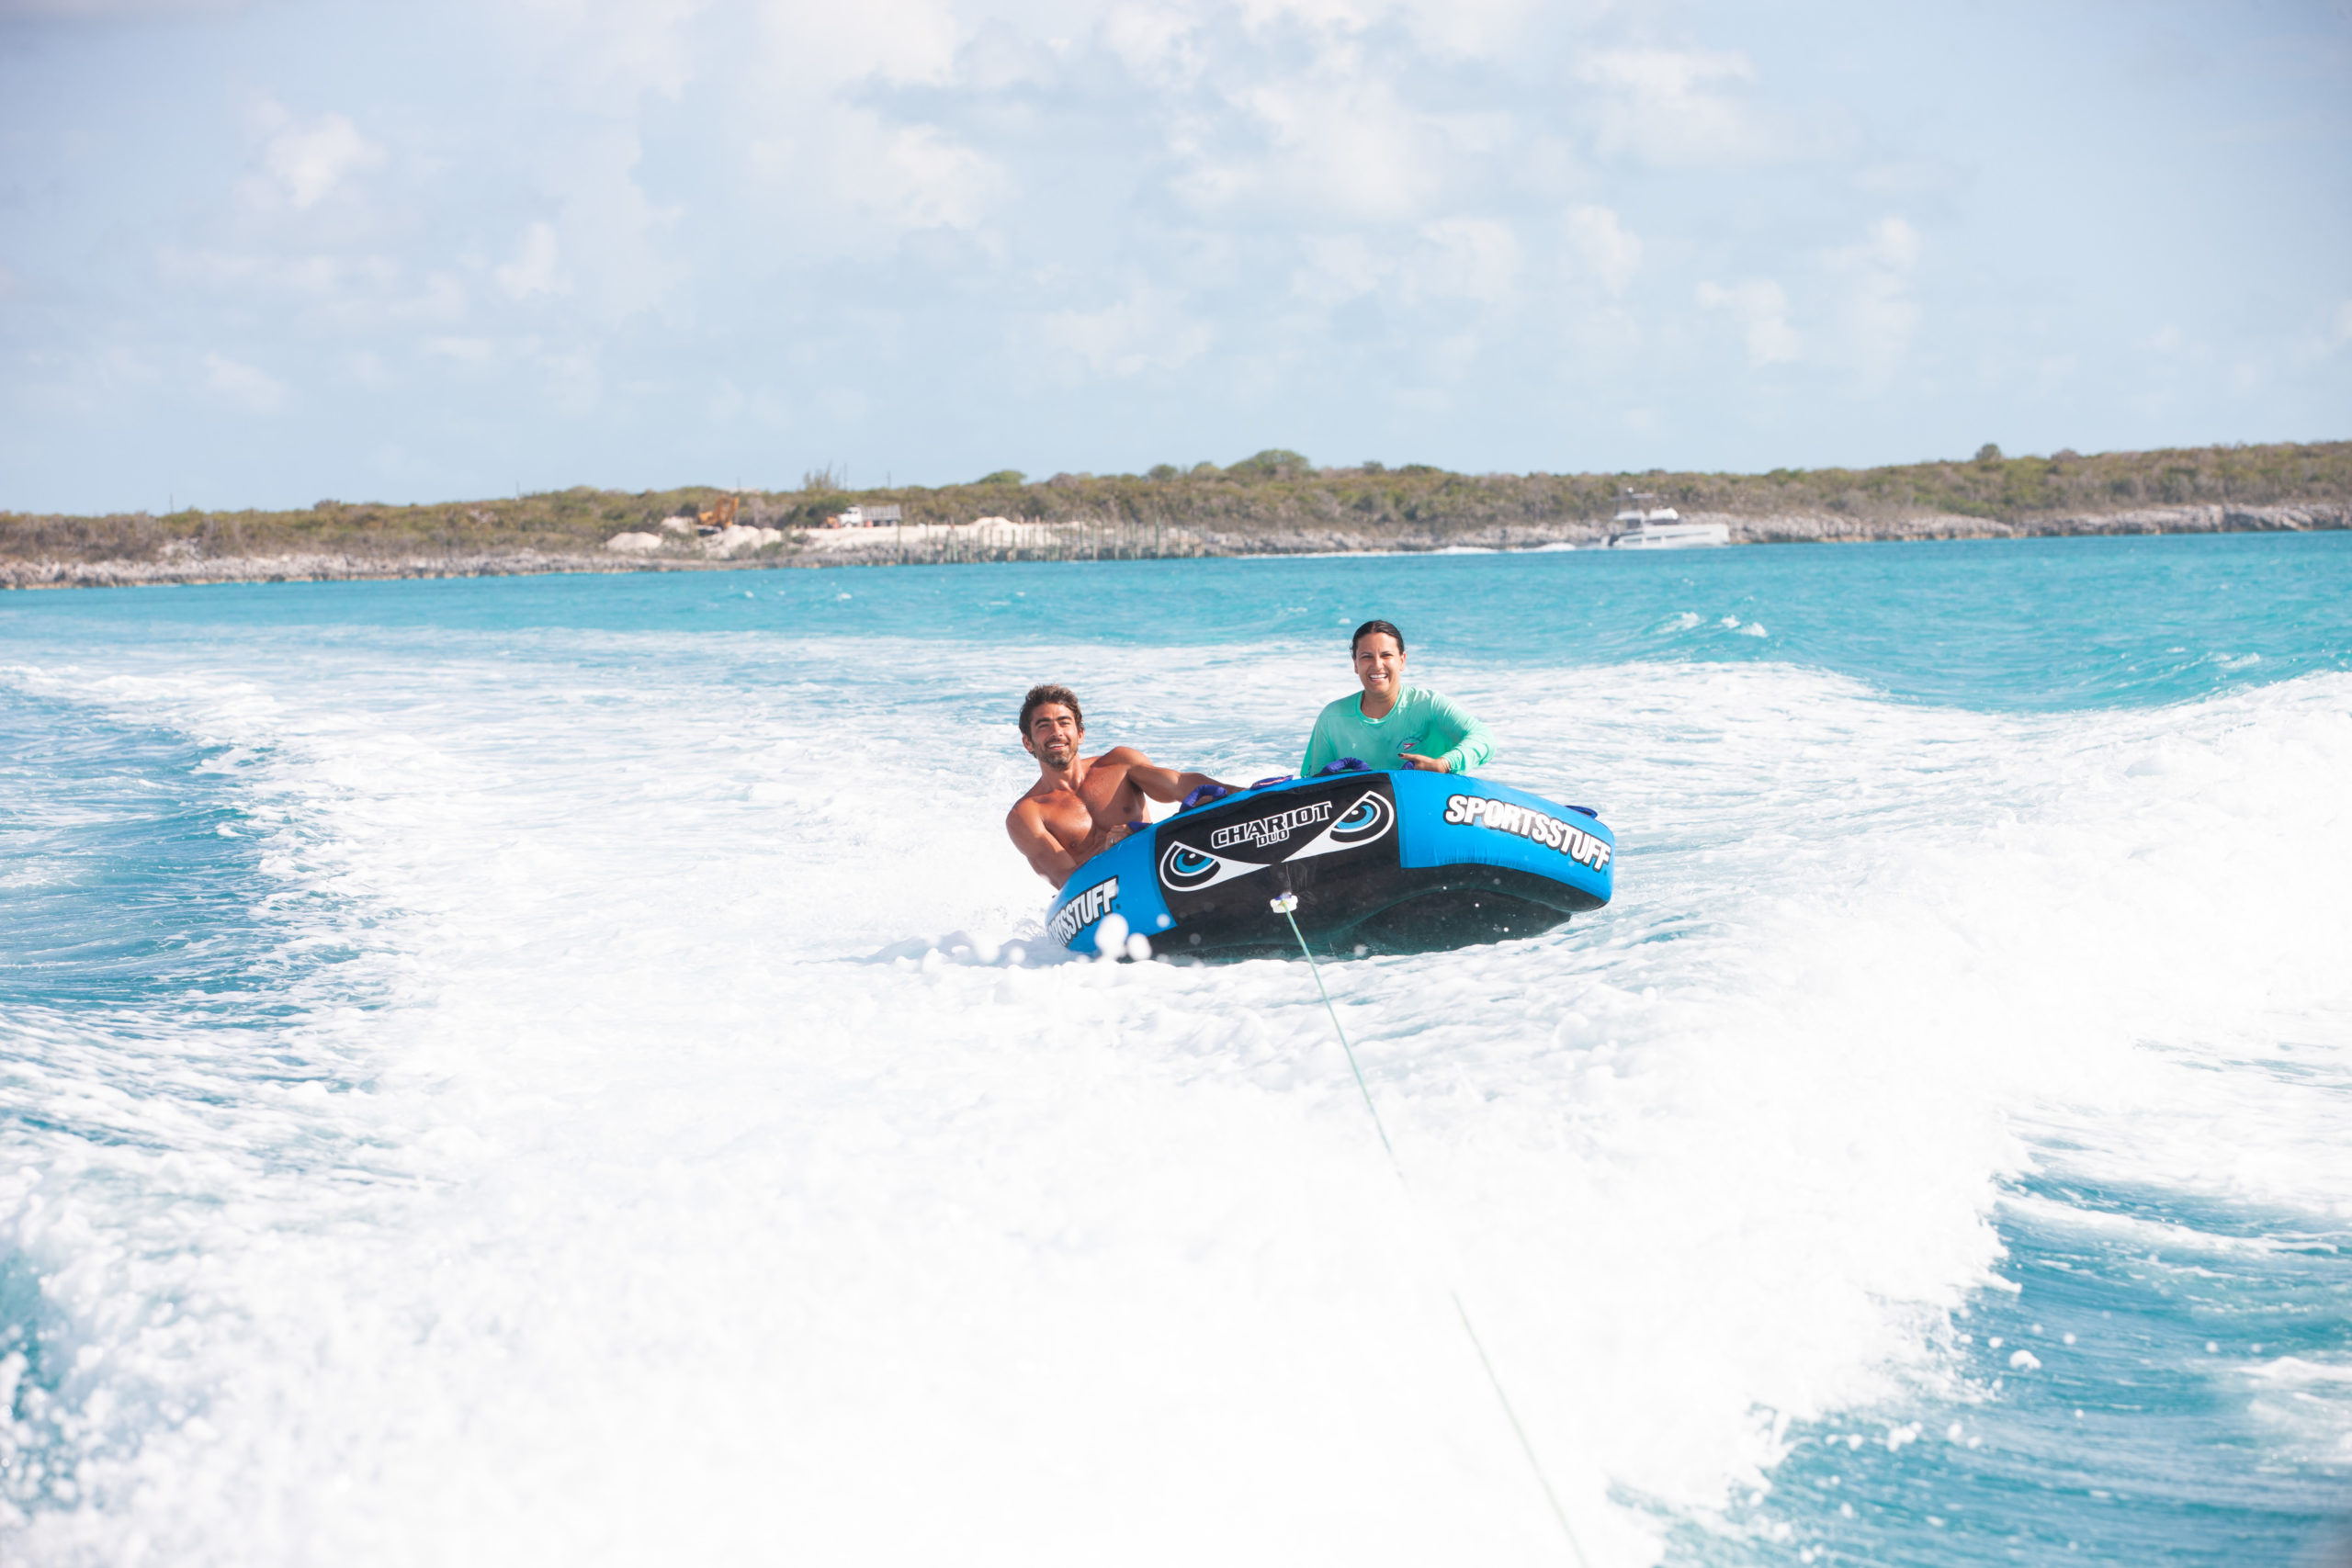 Things to do in Staniel Cay - Boat Tours